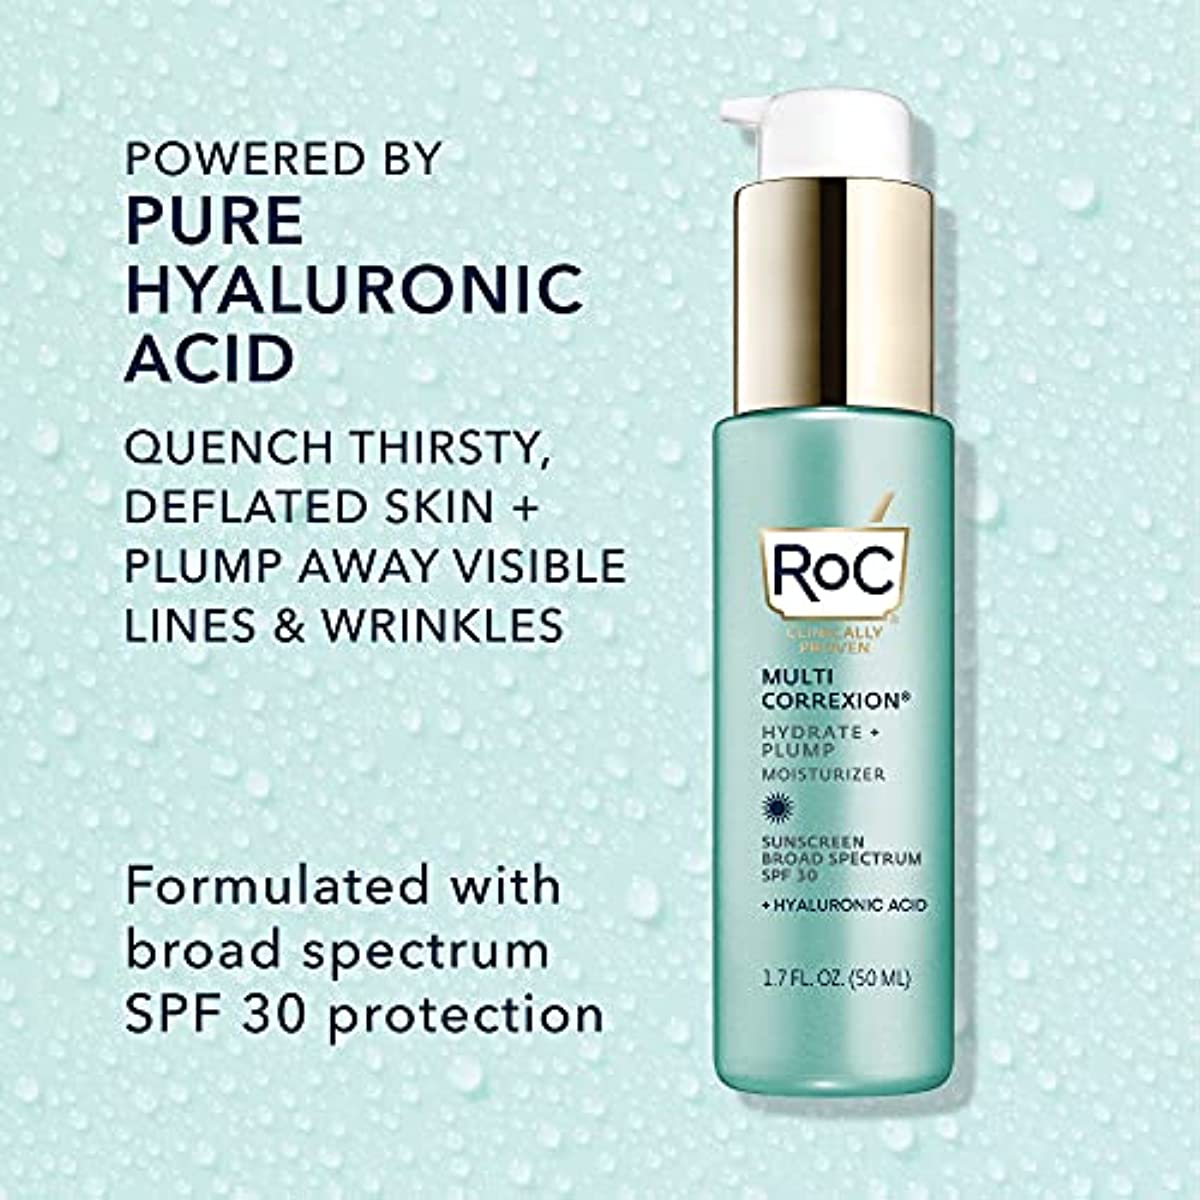 RoC Multi Correxion 1.5{246eb326121925eae9f805b36f8f320049ce26047920ec7cef0eaf2a193828d9} Pure Hyaluronic Acid Anti Aging Daily Face Moisturizer with Broad Spectrum Sunscreen SPF 30 (1.7 oz) + Eye Cream Packette, Paraben-free Skin Care for Women & Men